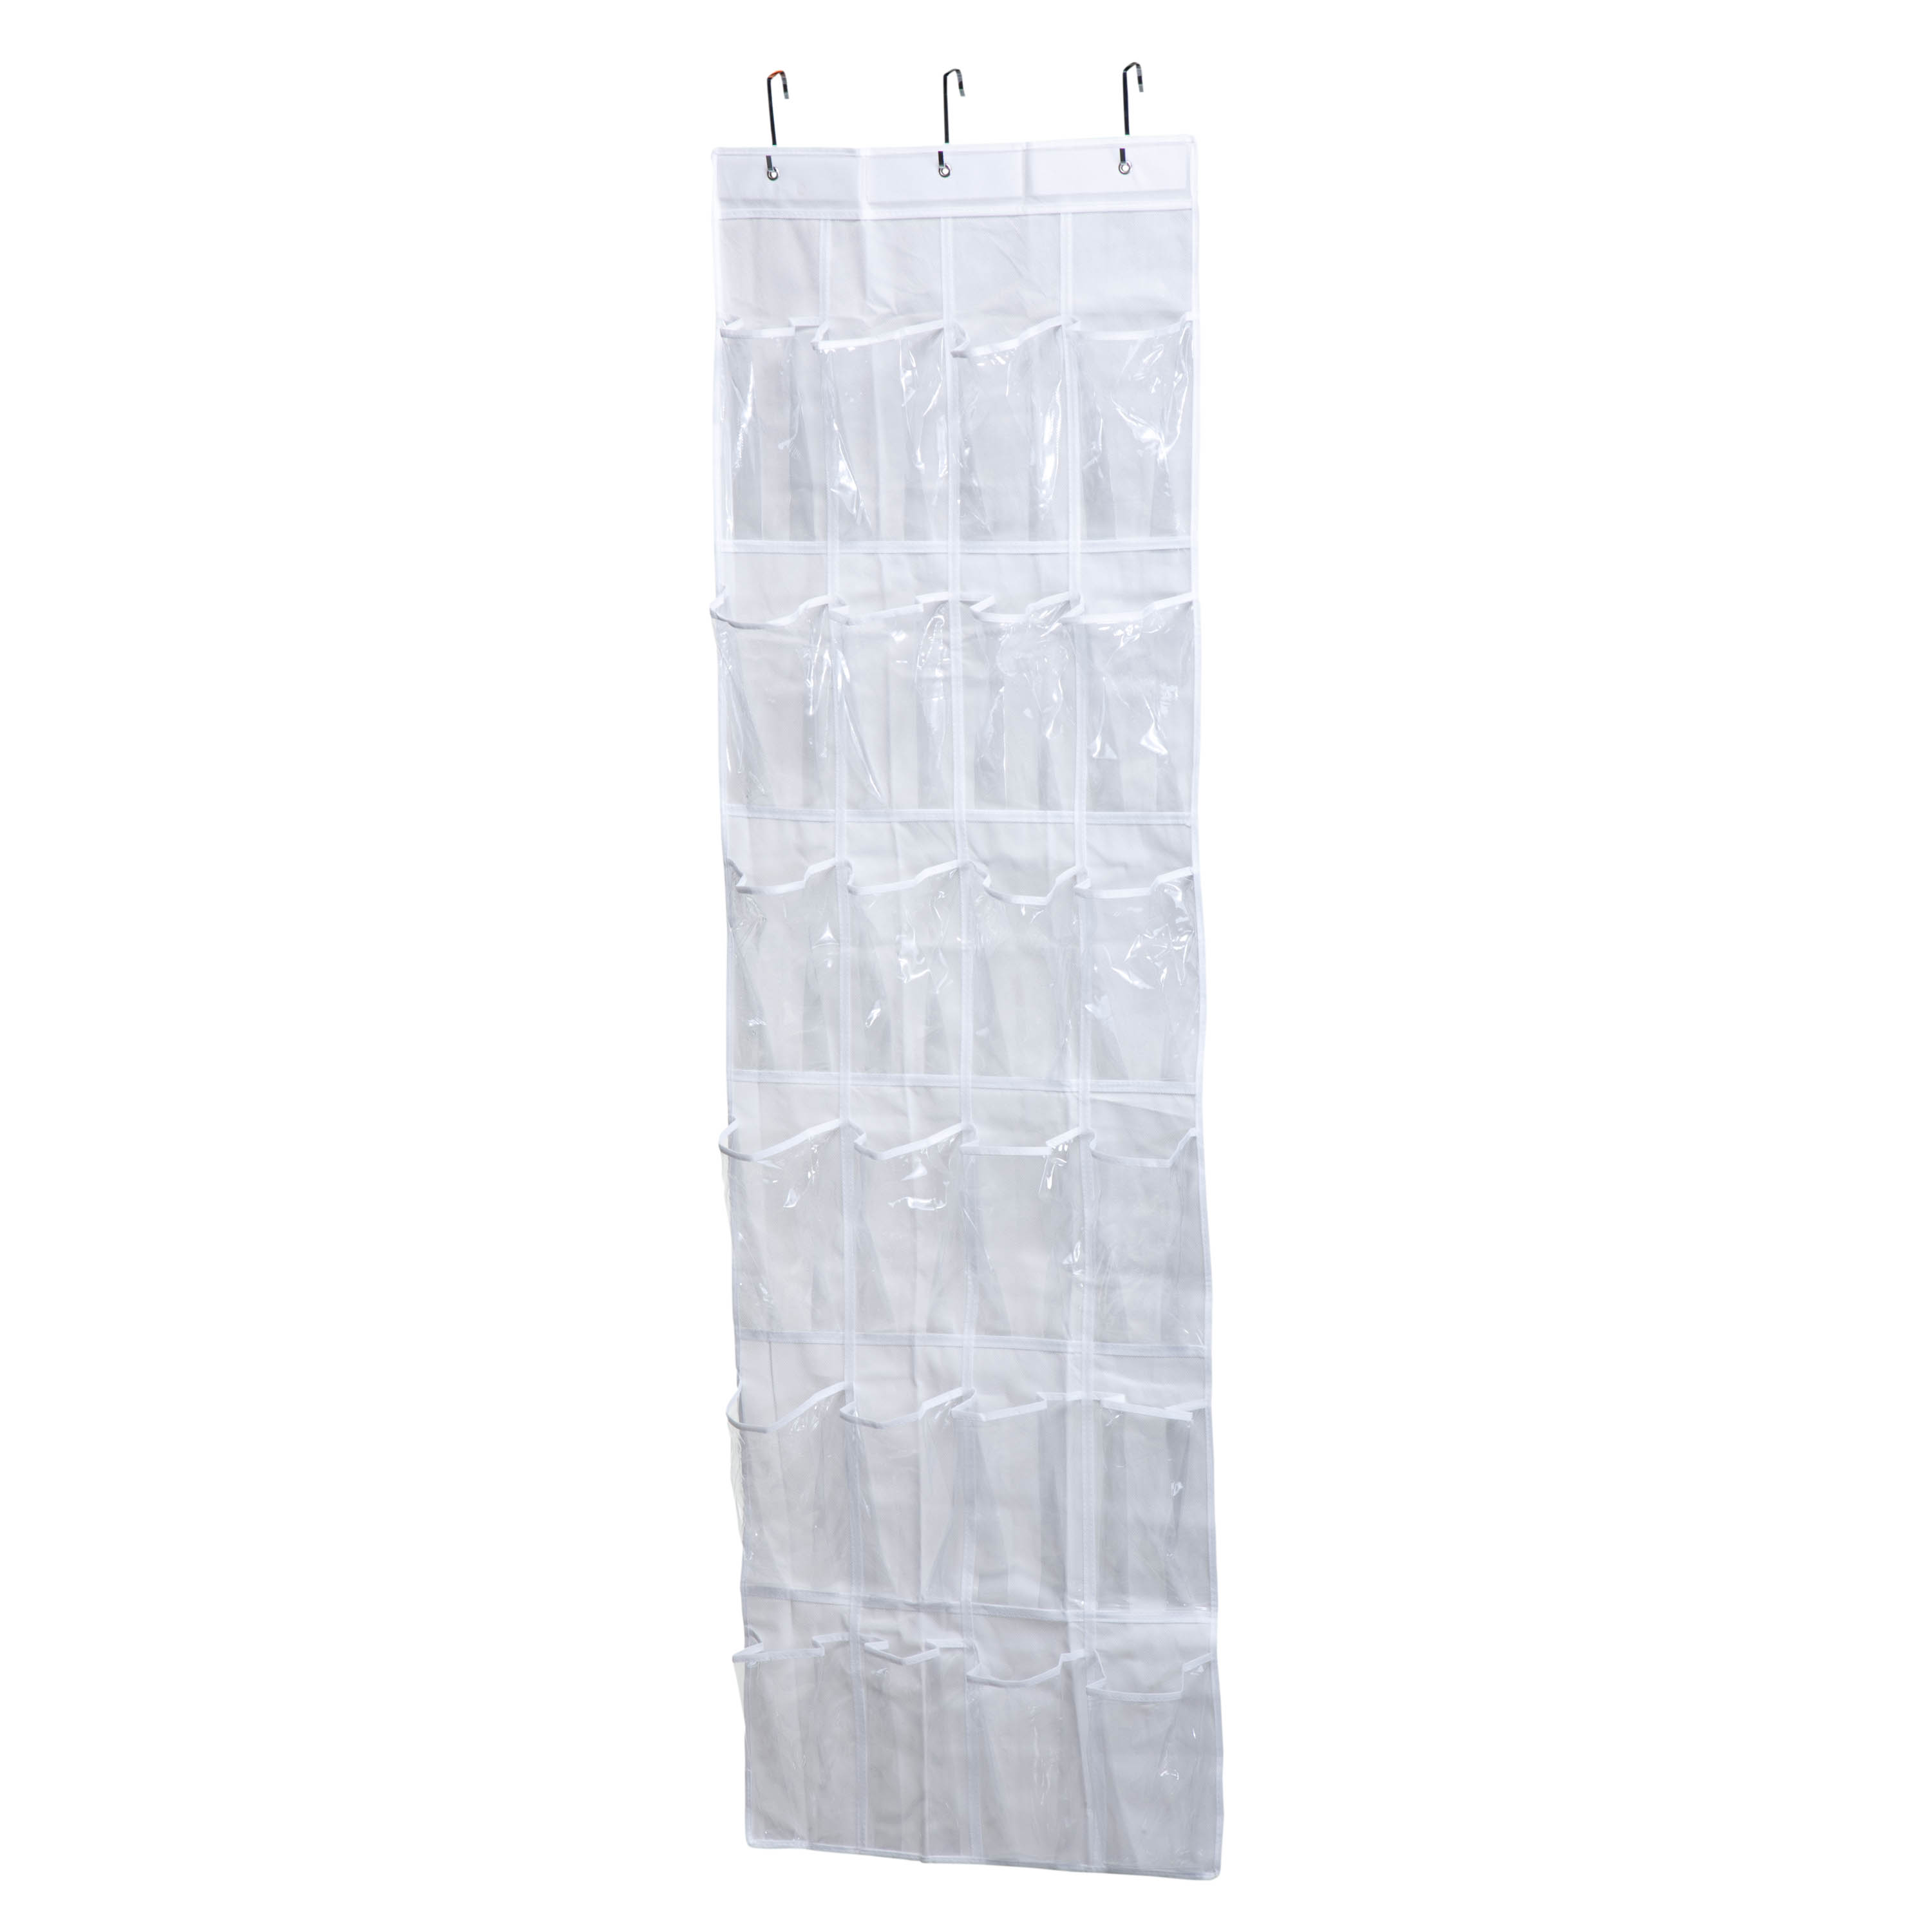 Honey-Can-Do PEVA 24-Pocket Over-the-Door Hanging Organizer, White/Clear - image 2 of 4